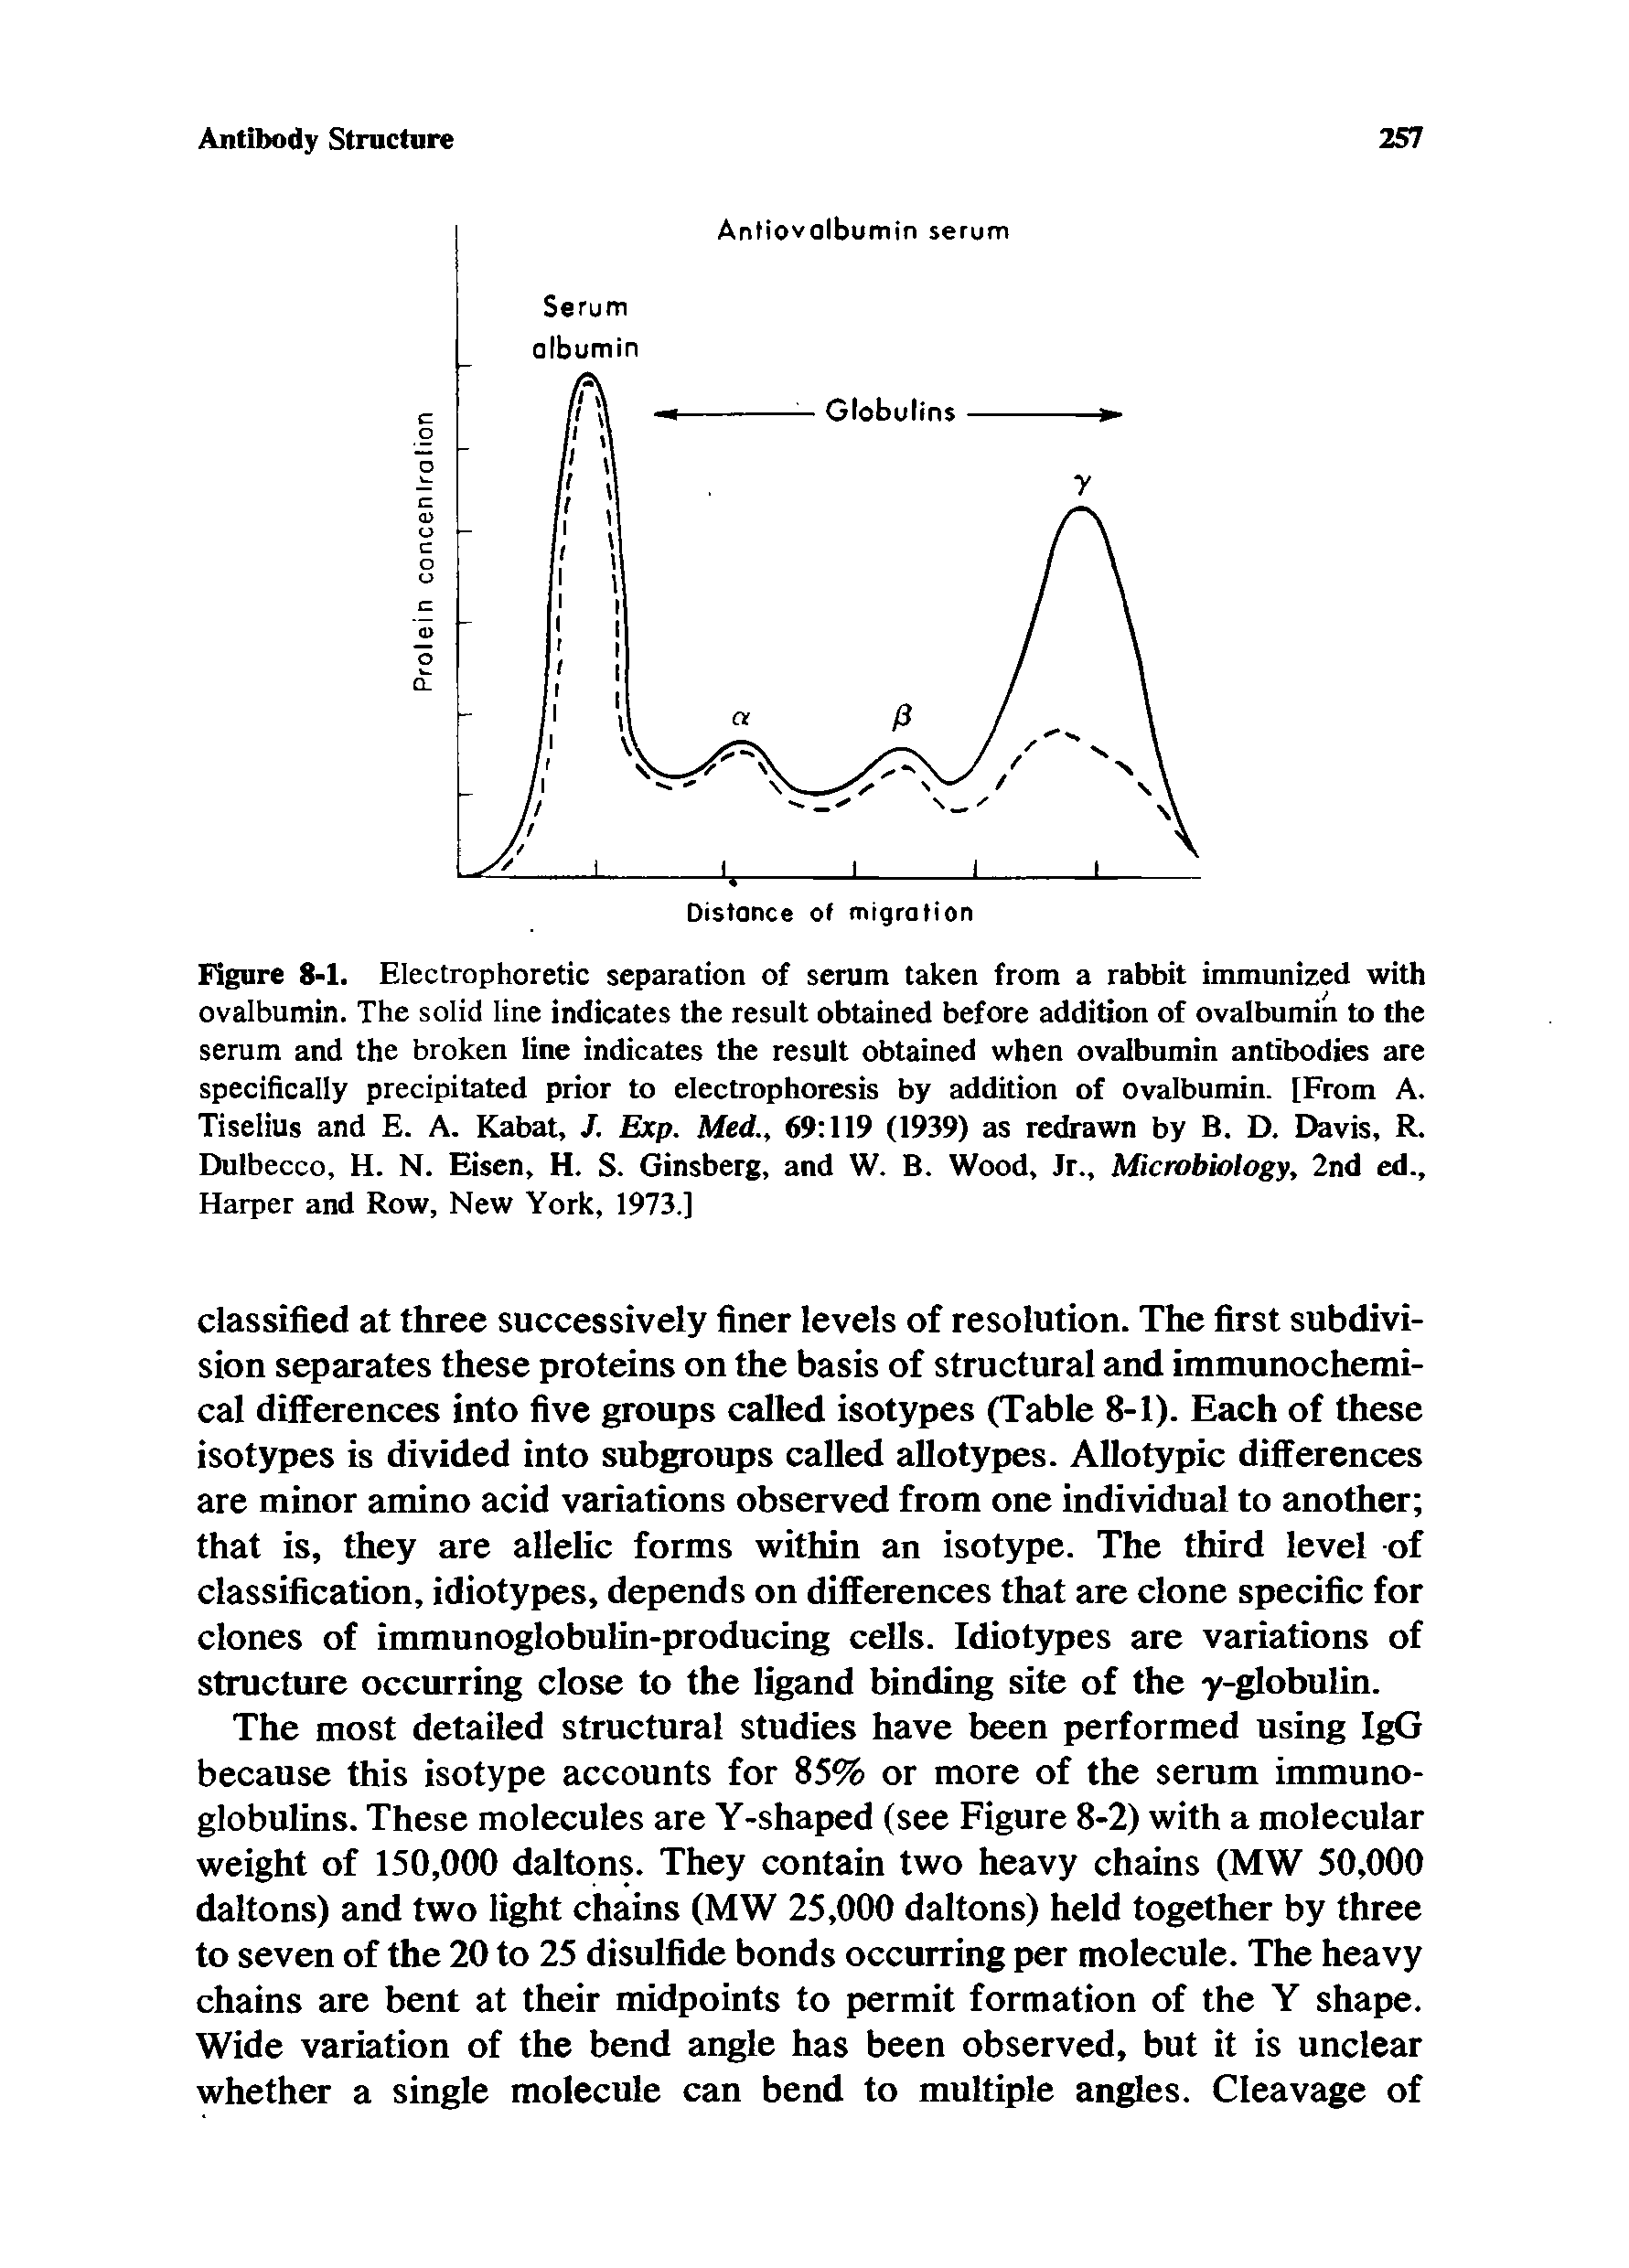 Figure 8-1. Electrophoretic separation of serum taken from a rabbit immunized with ovalbumin. The solid line indicates the result obtained before addition of ovalbumin to the serum and the broken line indicates the result obtained when ovalbumin antibodies are specifically precipitated prior to electrophoresis by addition of ovalbumin. [From A. Tiselius and E. A. Kabat, J. Exp. Med., 69 119 (1939) as redrawn by B. D. Davis, R. Dulbecco, H. N. Eisen, H. S. Ginsberg, and W. B. Wood, Jr., Microbiology, 2nd ed.. Harper and Row, New York, 1973.]...